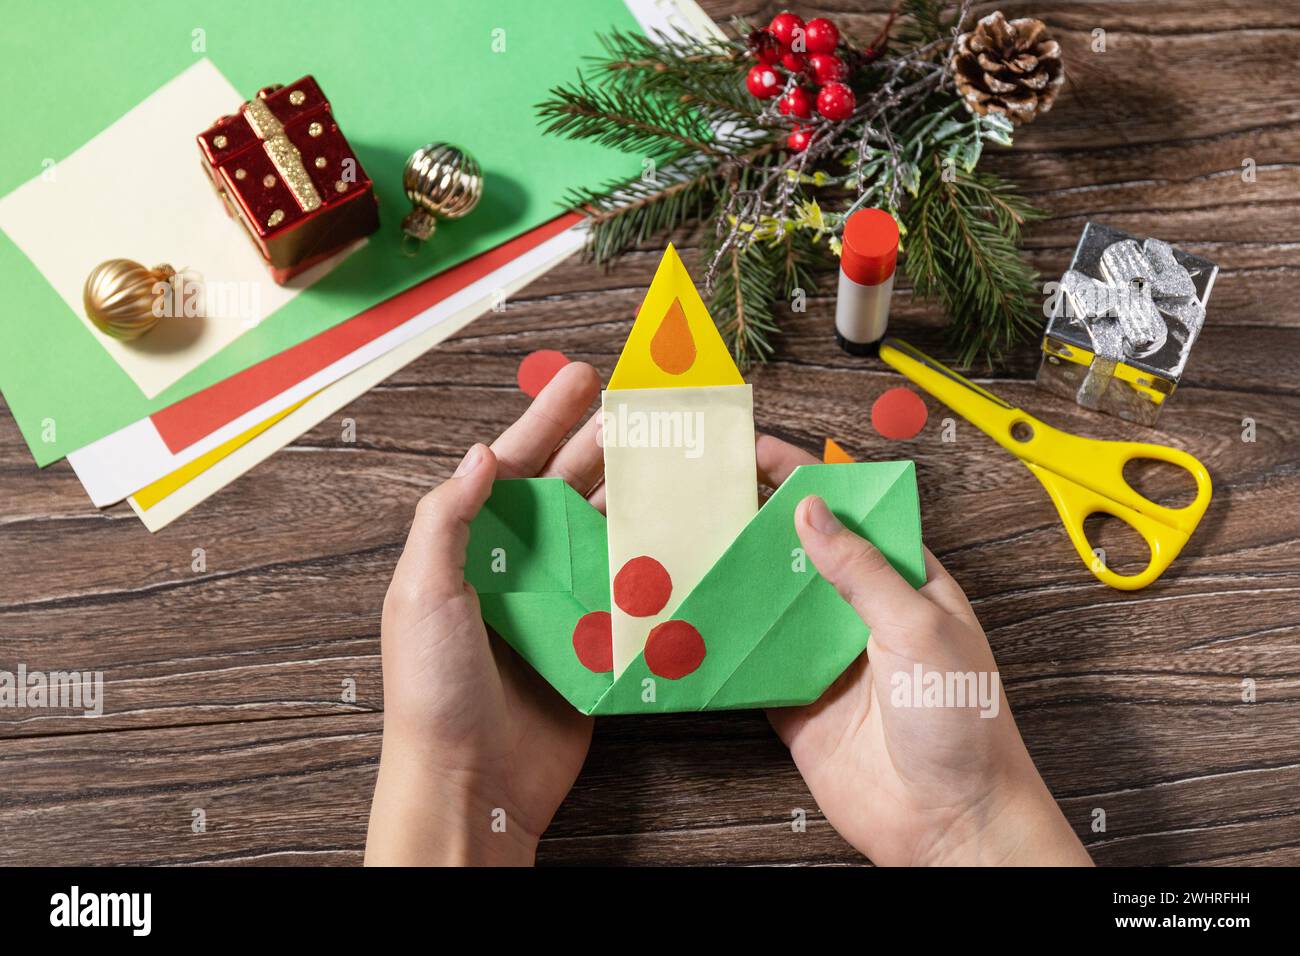 In the hands of a child Christmas greeting card gift origami candle on wooden table. Childrens art project, handmade, crafts for Stock Photo